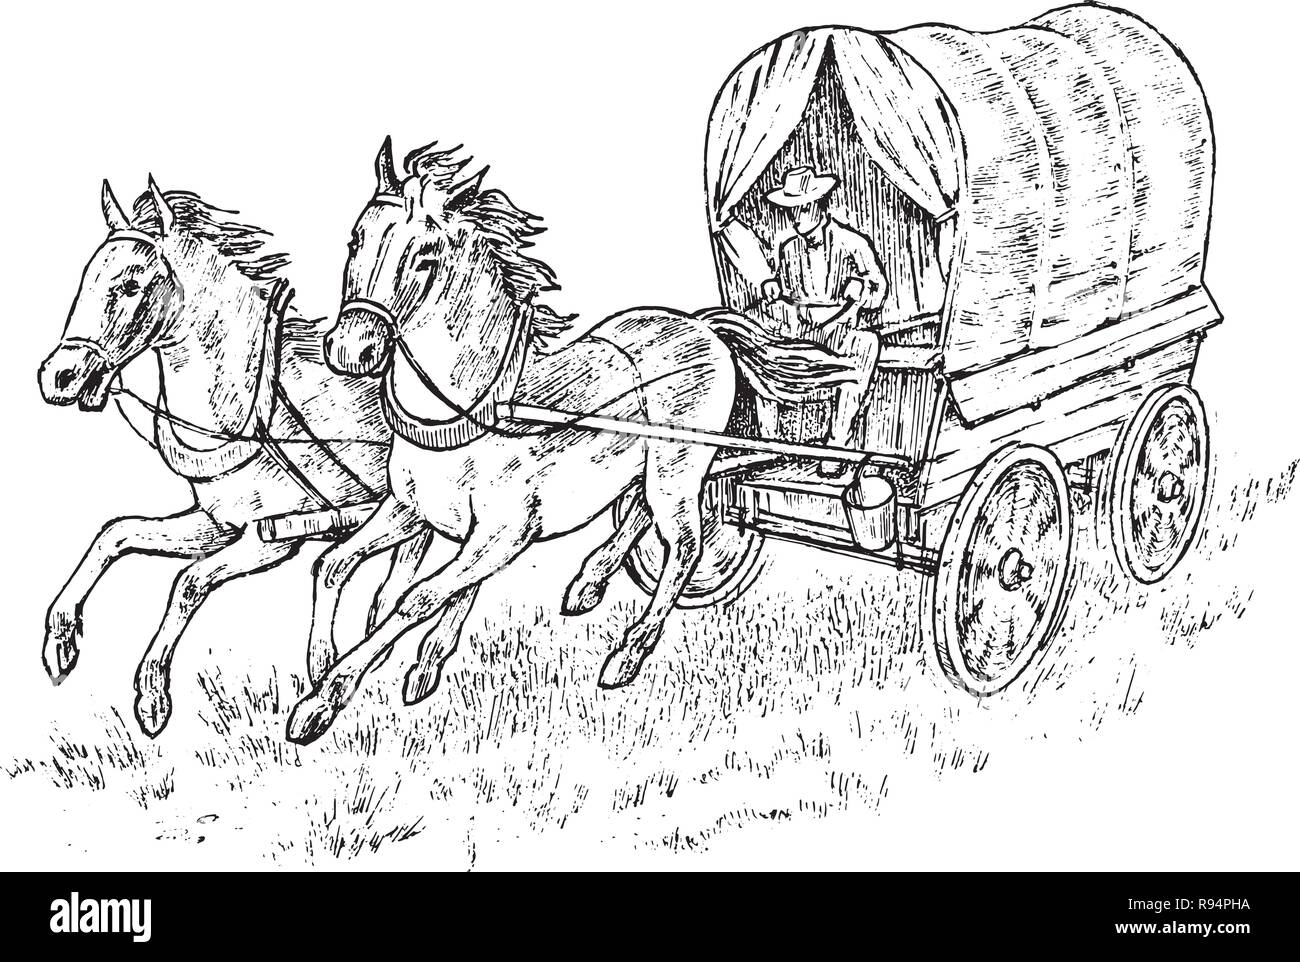 Cowboy in the carriage. Vintage horse harness or sheriff s cart. Western rodeo icon, Texas Ranger, Sheriff in hat. Wild West, Country style. Hand drawn engraved sketch. Stock Vector